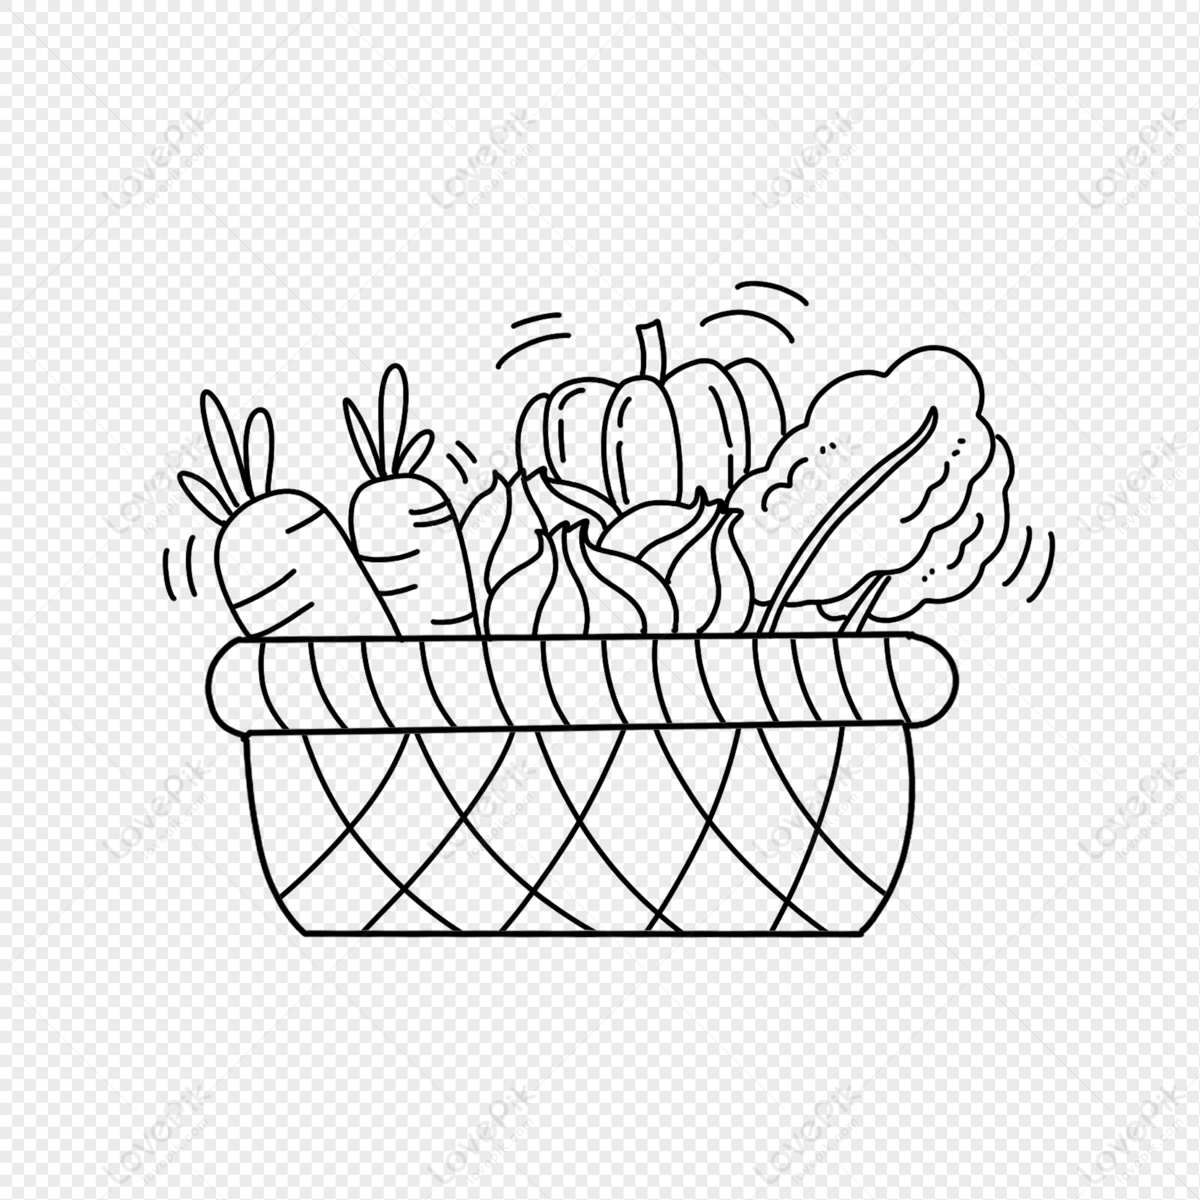 How to draw furit basket easy with pencil shading || Pencil shading fruit basket  drawing - YouTube